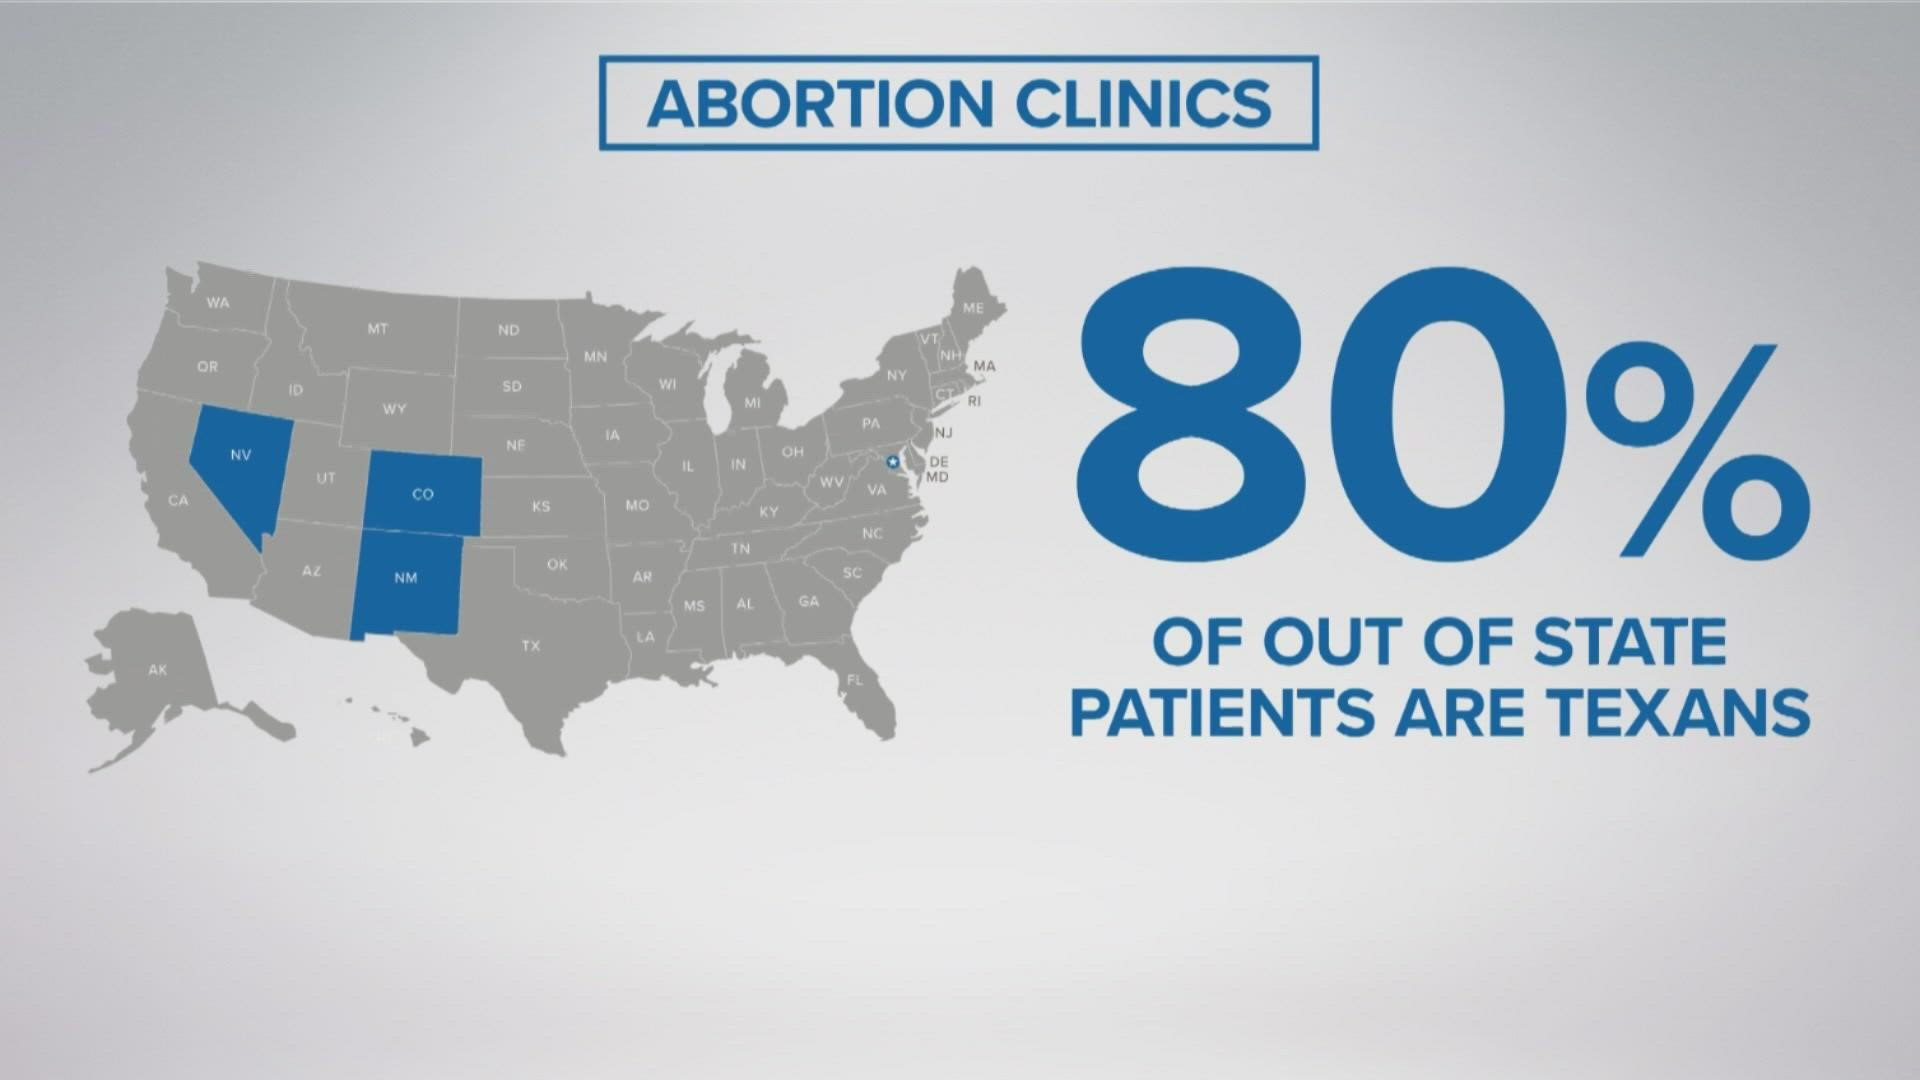 Pregnant women from Texas make up about 80% of out-of-state patients for Planned Parenthood of the Rocky Mountains.